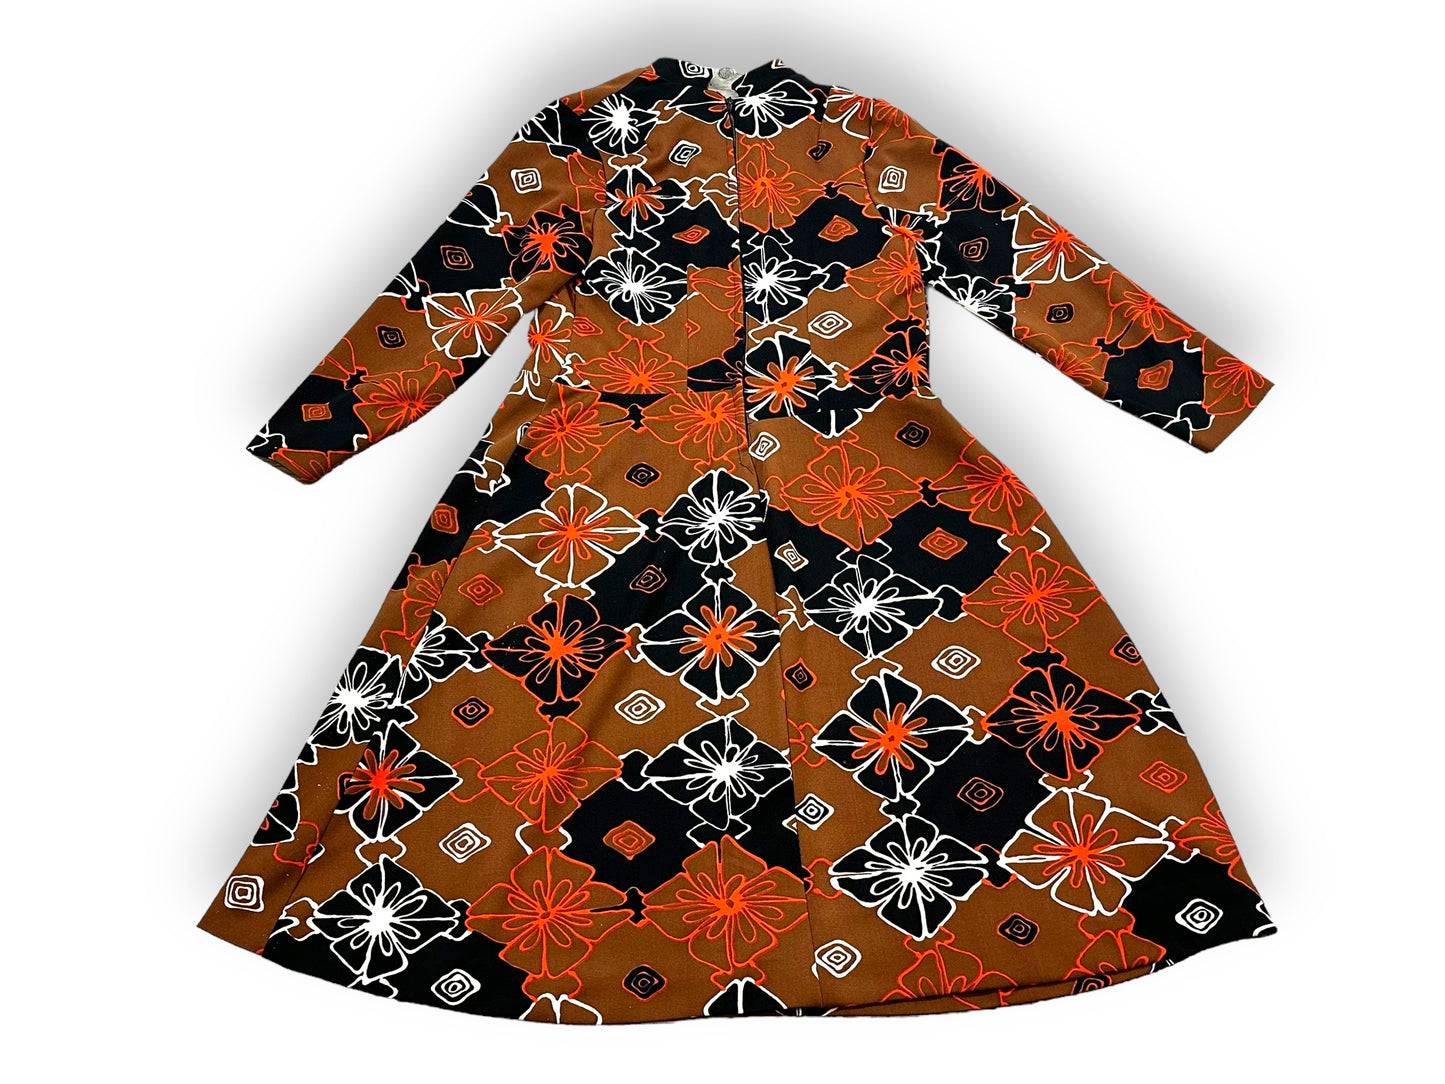 1960s Floral Graphic Dress